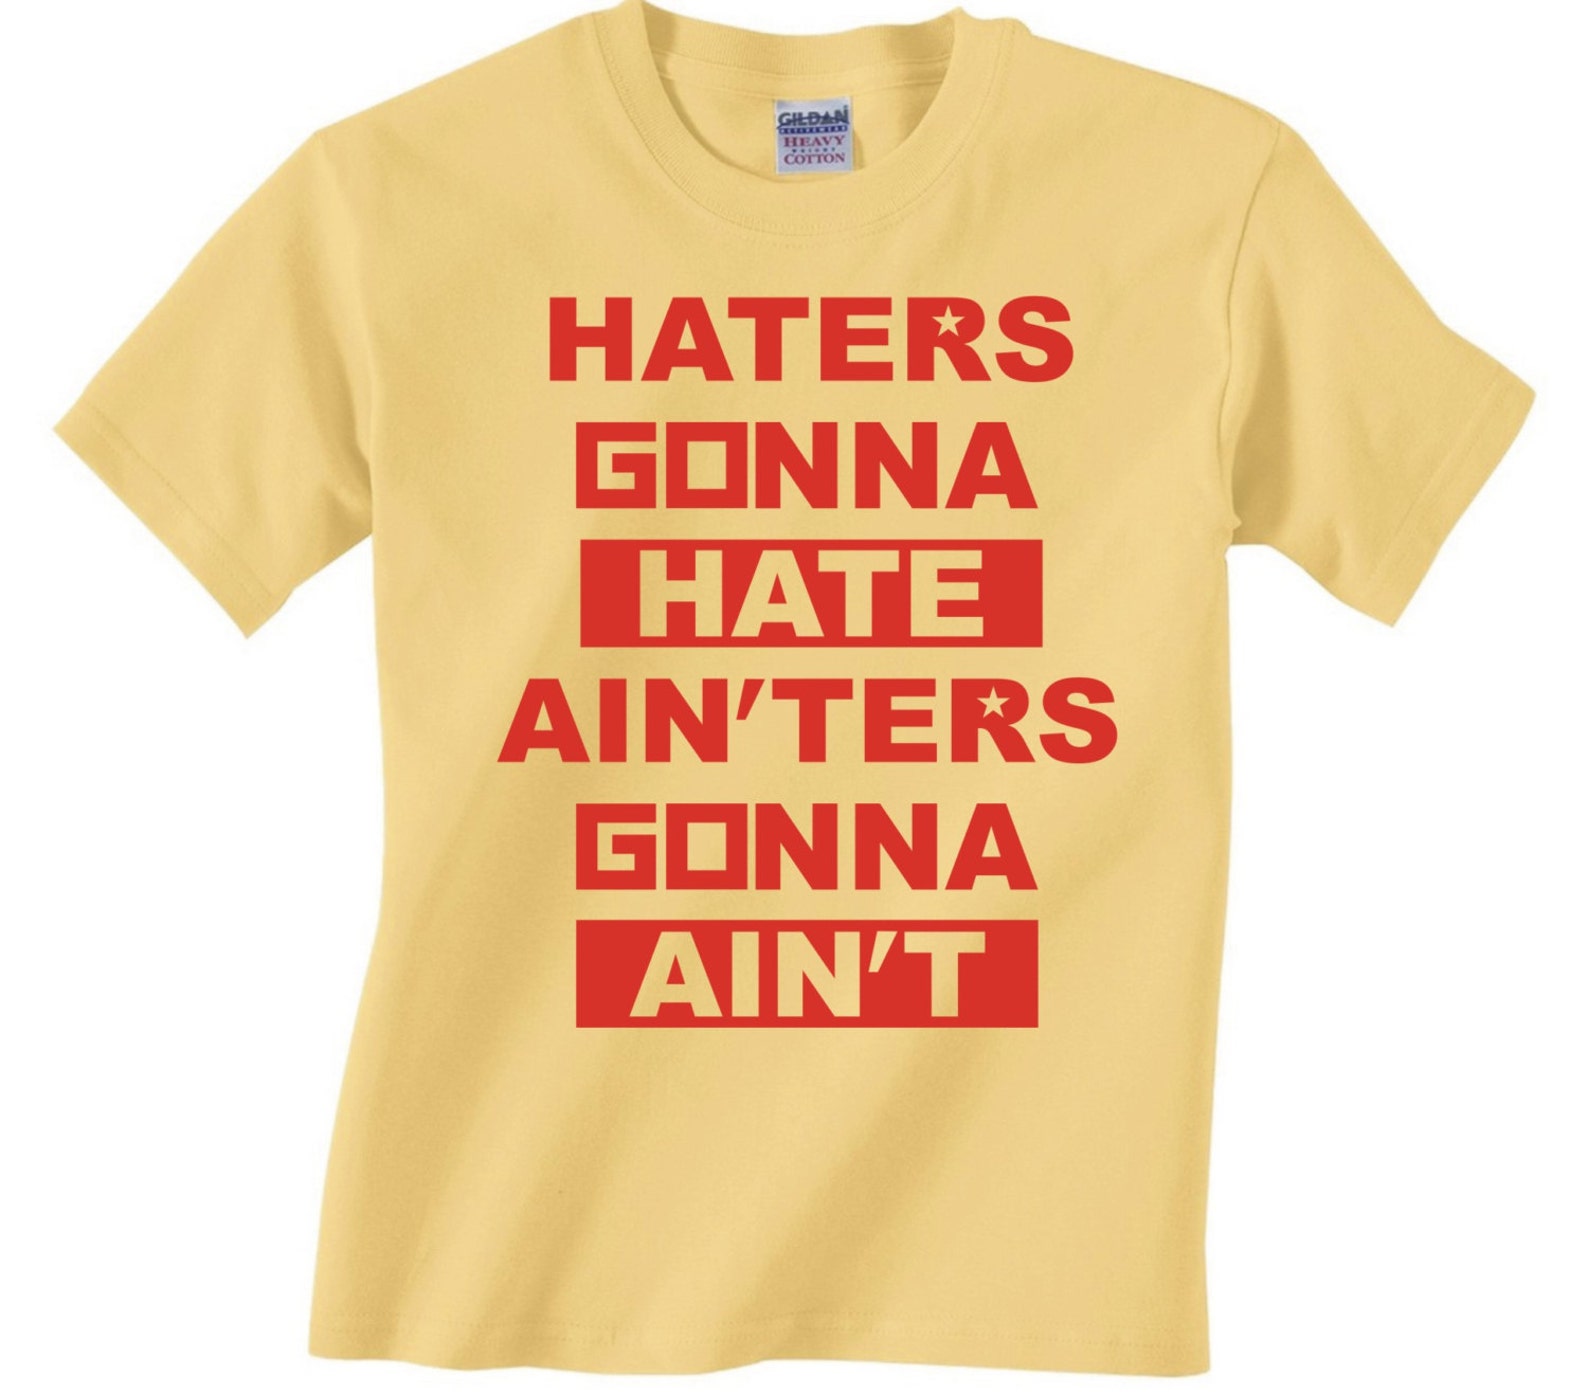 Haters gonna hate and ainters gonna aint